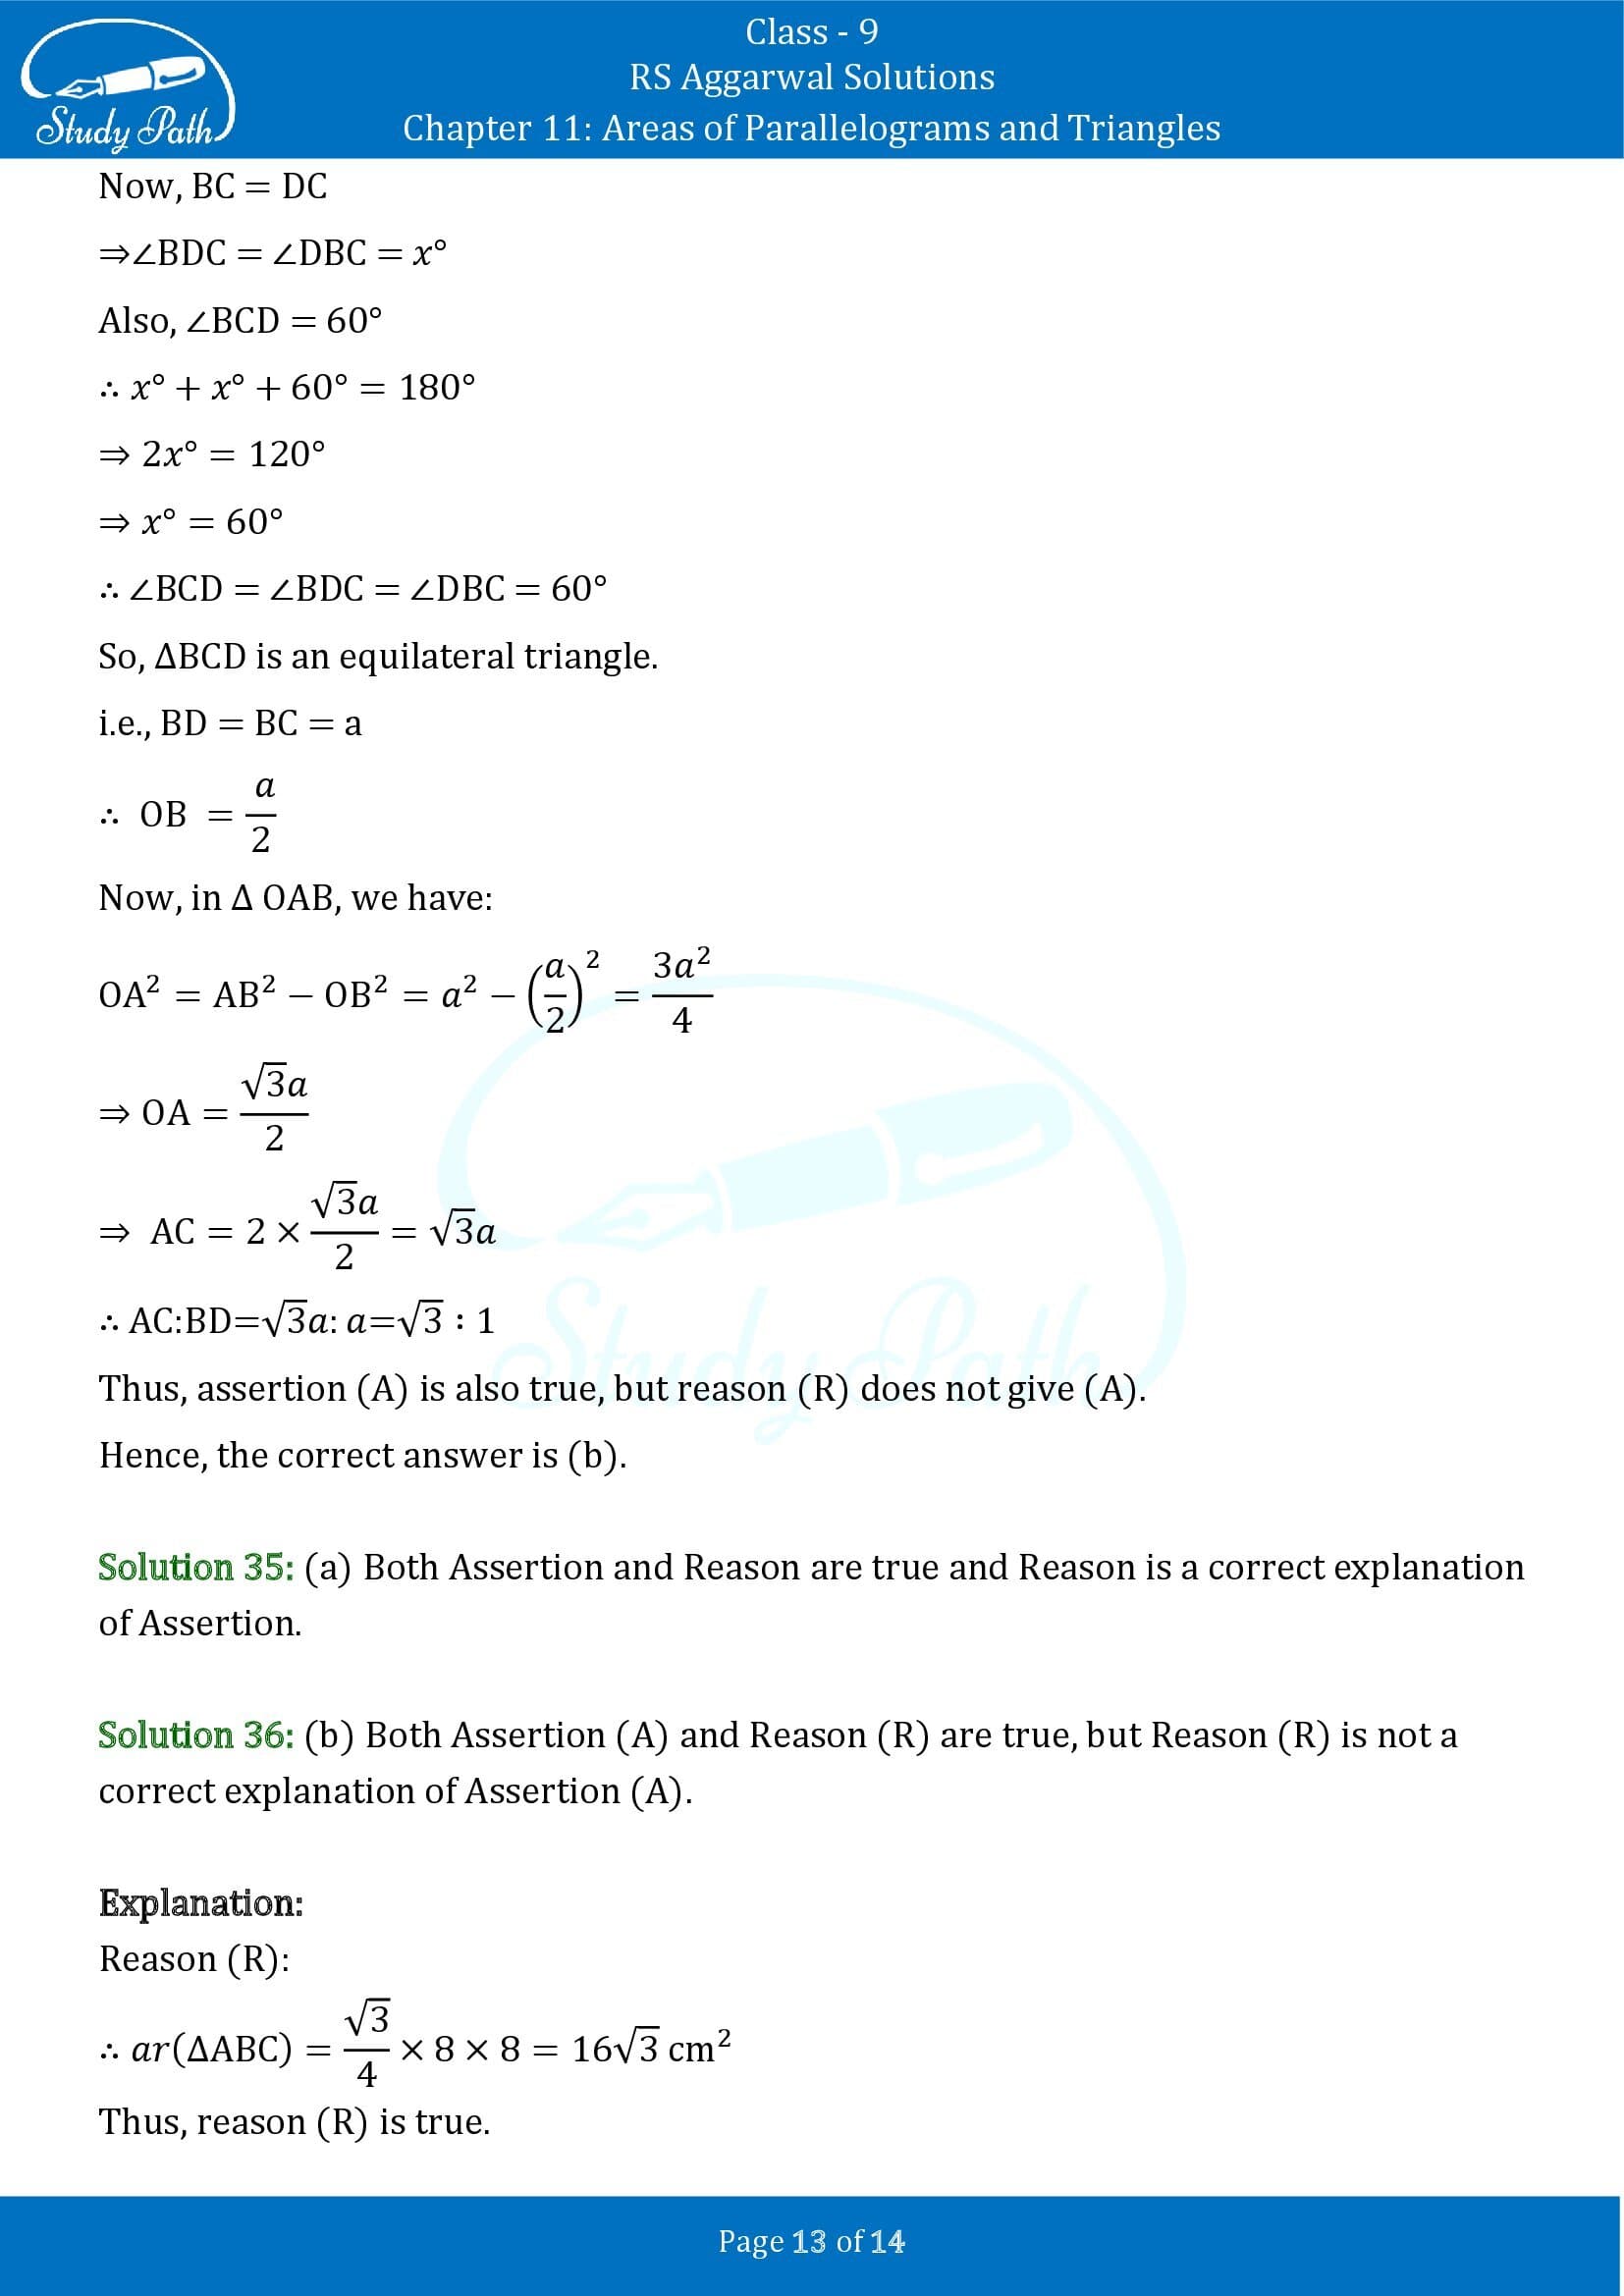 RS Aggarwal Solutions Class 9 Chapter 11 Areas of Parallelograms and Triangles Multiple Choice Questions MCQs 00013